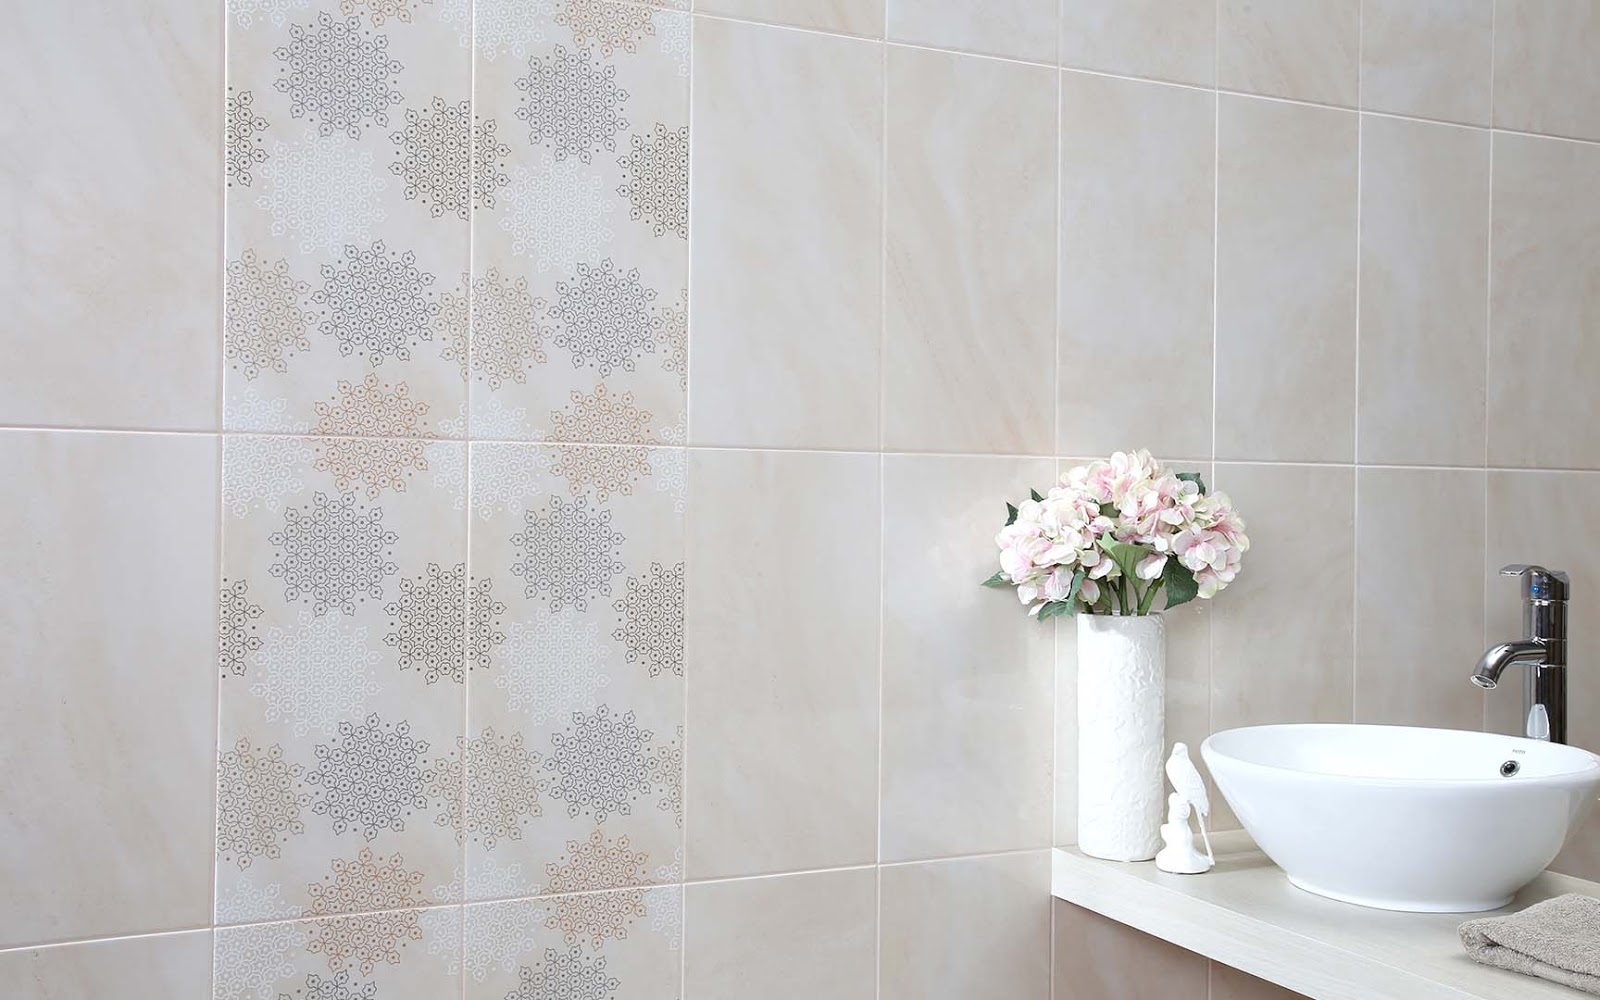 Sell Wall Tile Roman dMonza from Indonesia by Pusat 